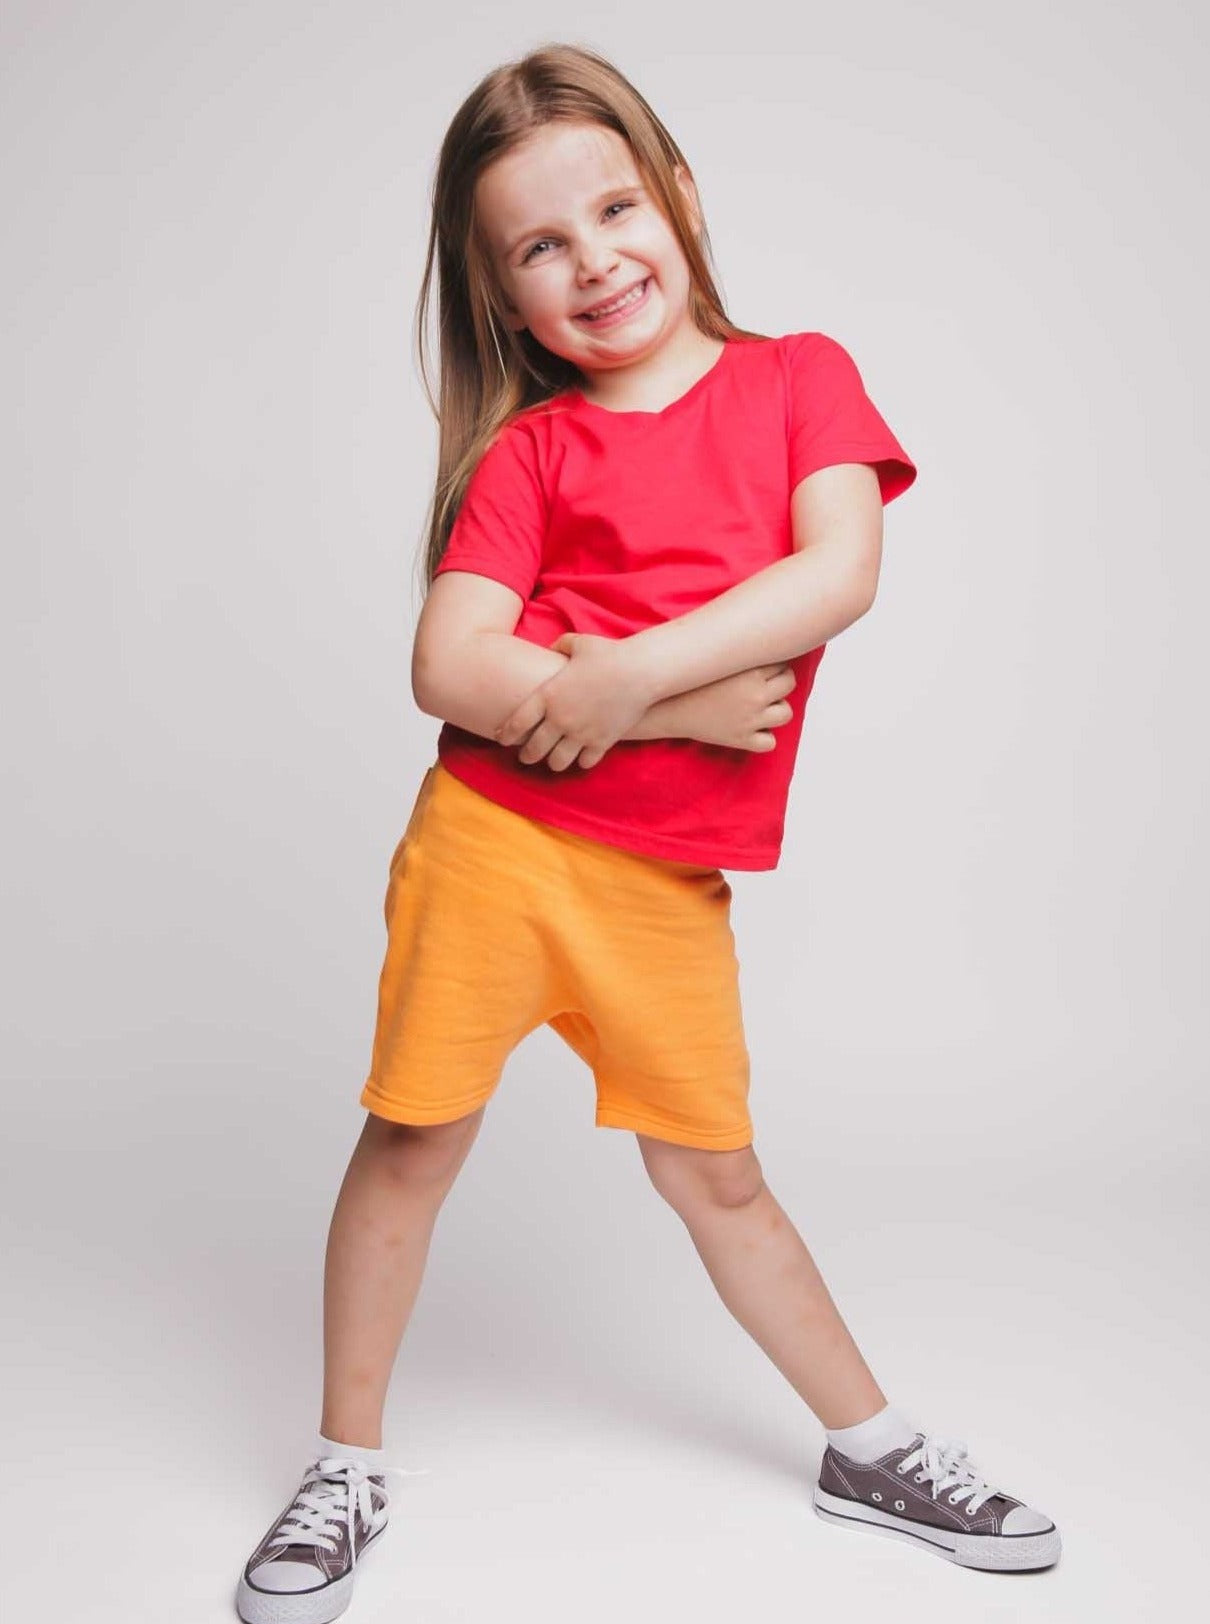 A girl wearing a red t-shirt and orange shorts - Hues Clothing